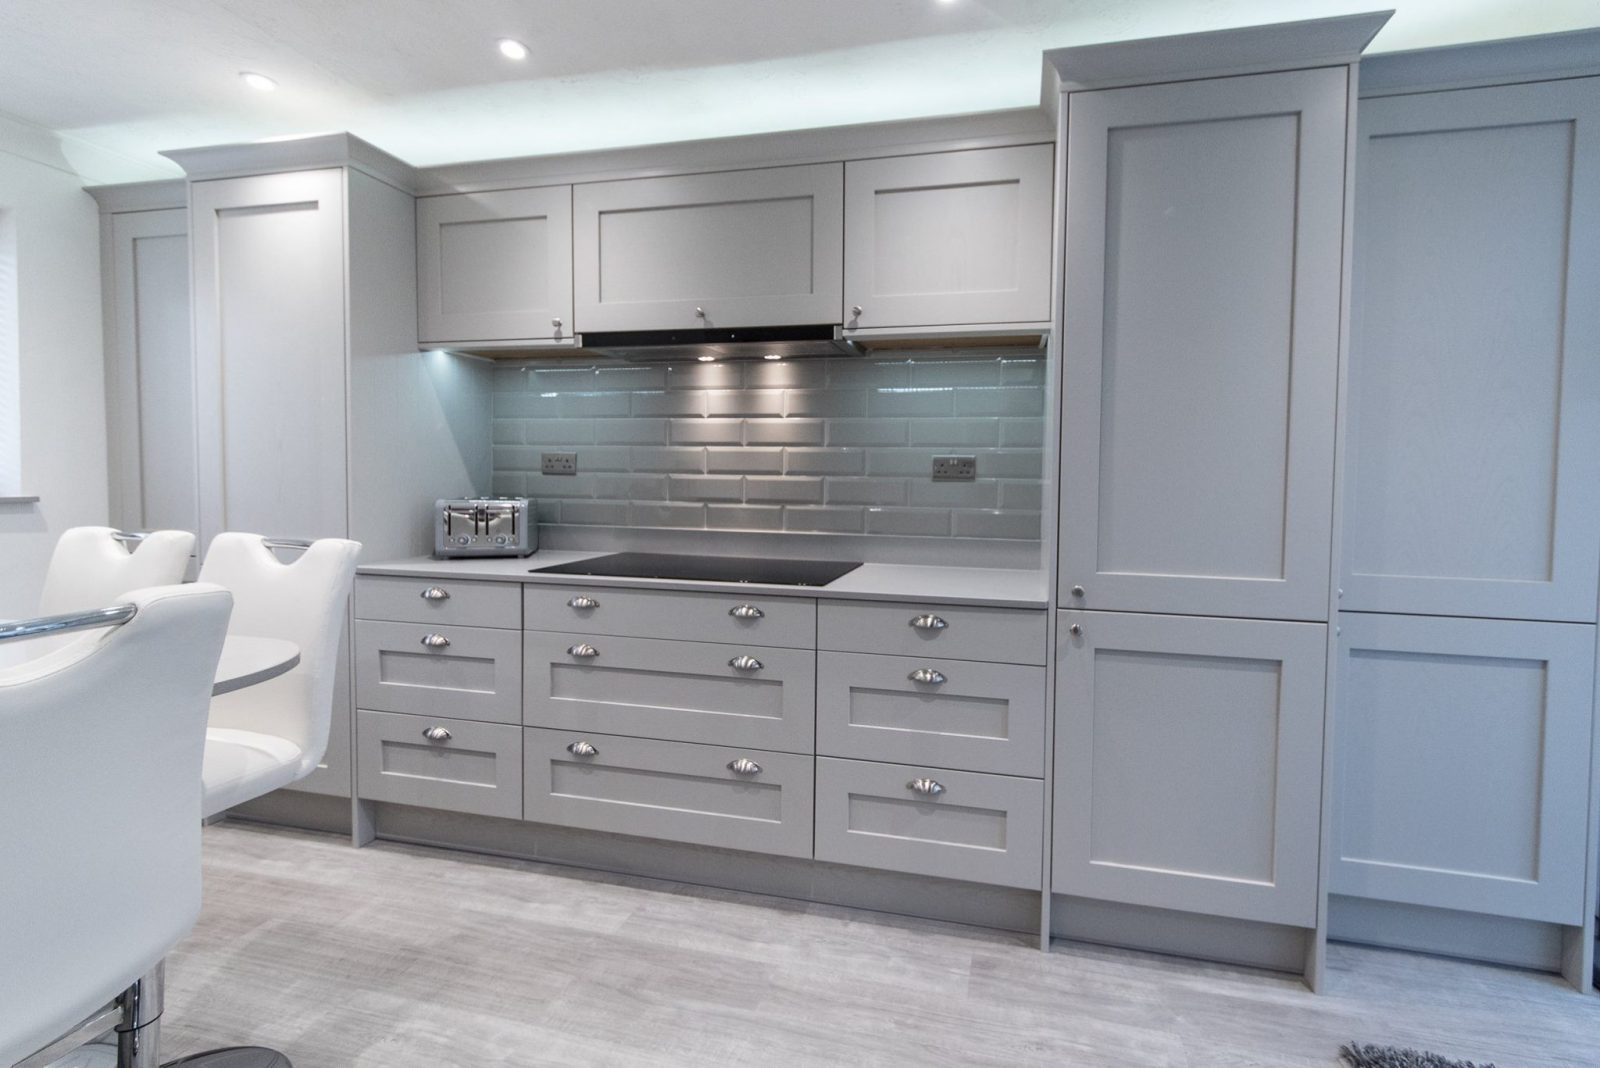 Grey Kitchens are Taking Over - Rock and Co Granite Ltd